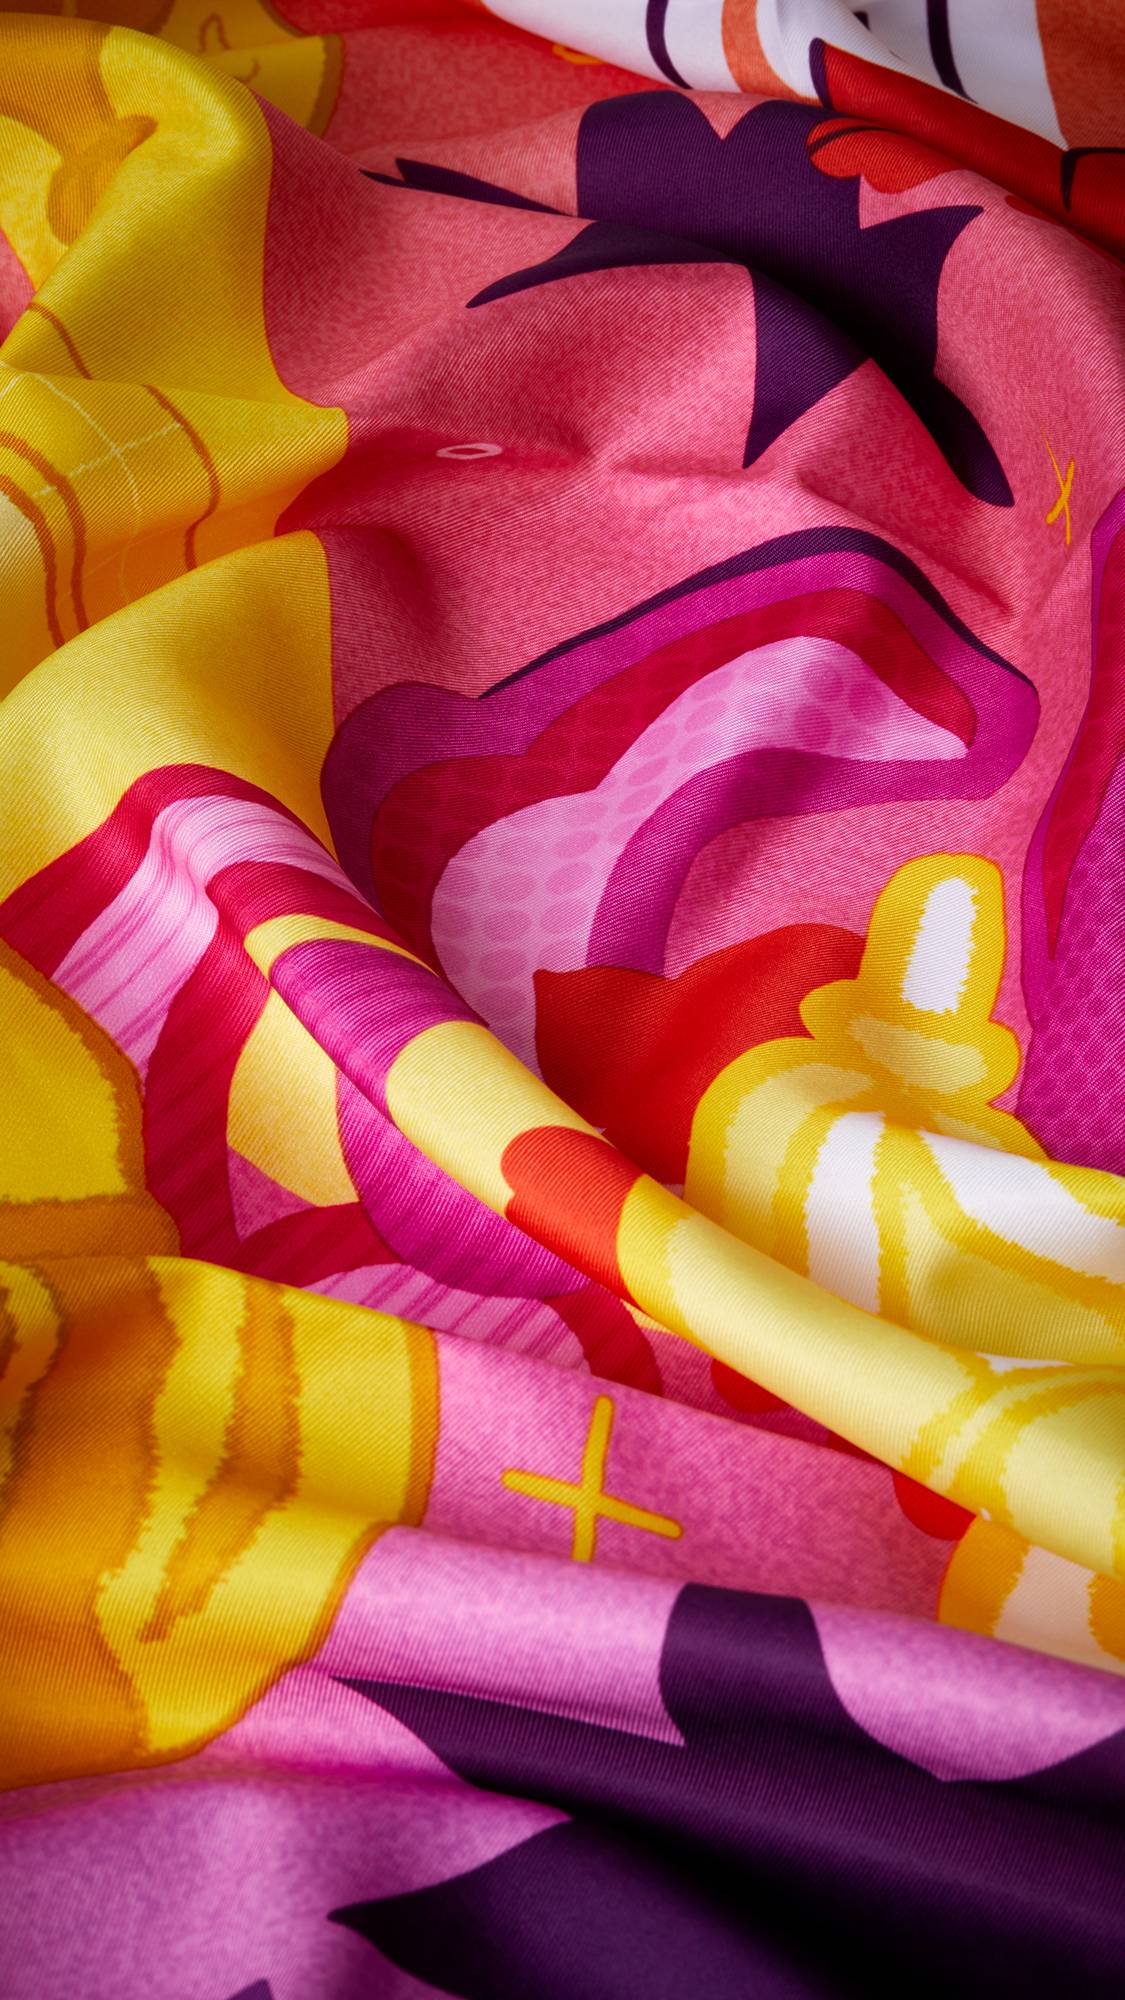 A super close-up image of the Guiding Lights knot wrap focusing on the ruffles of fabric and pattern.